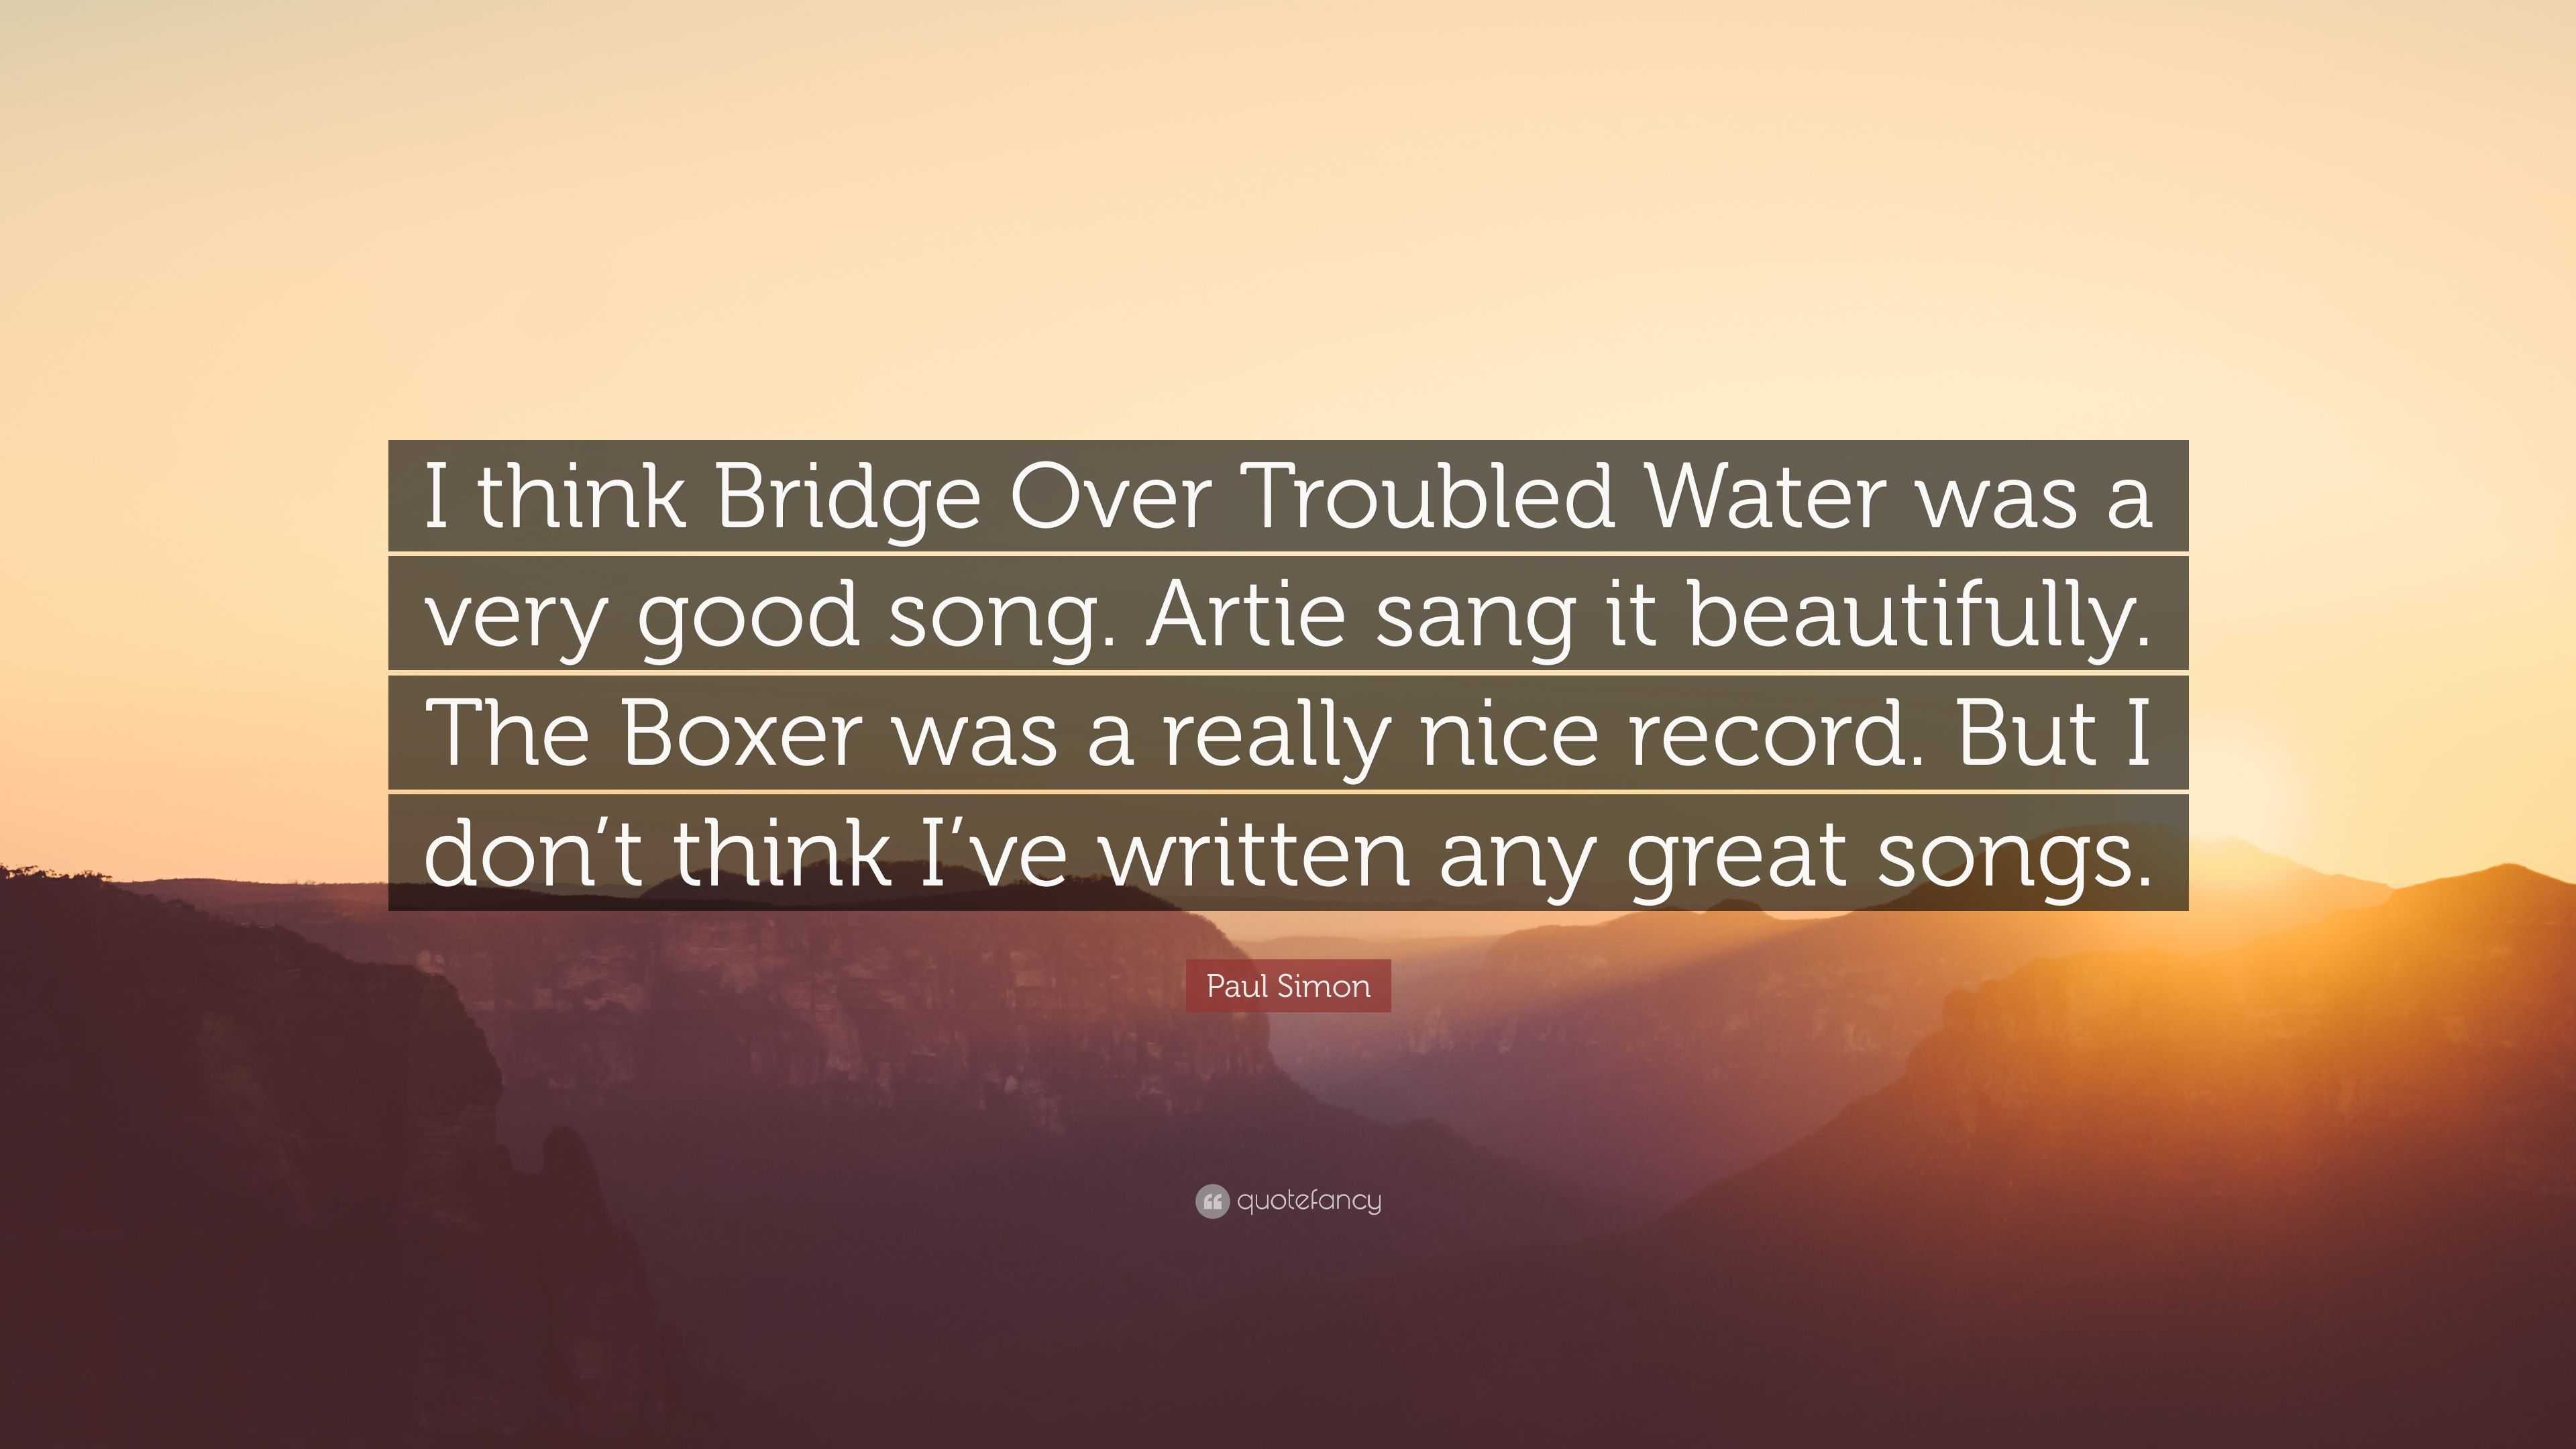 https://quotefancy.com/media/wallpaper/3840x2160/3926782-Paul-Simon-Quote-I-think-Bridge-Over-Troubled-Water-was-a-very.jpg